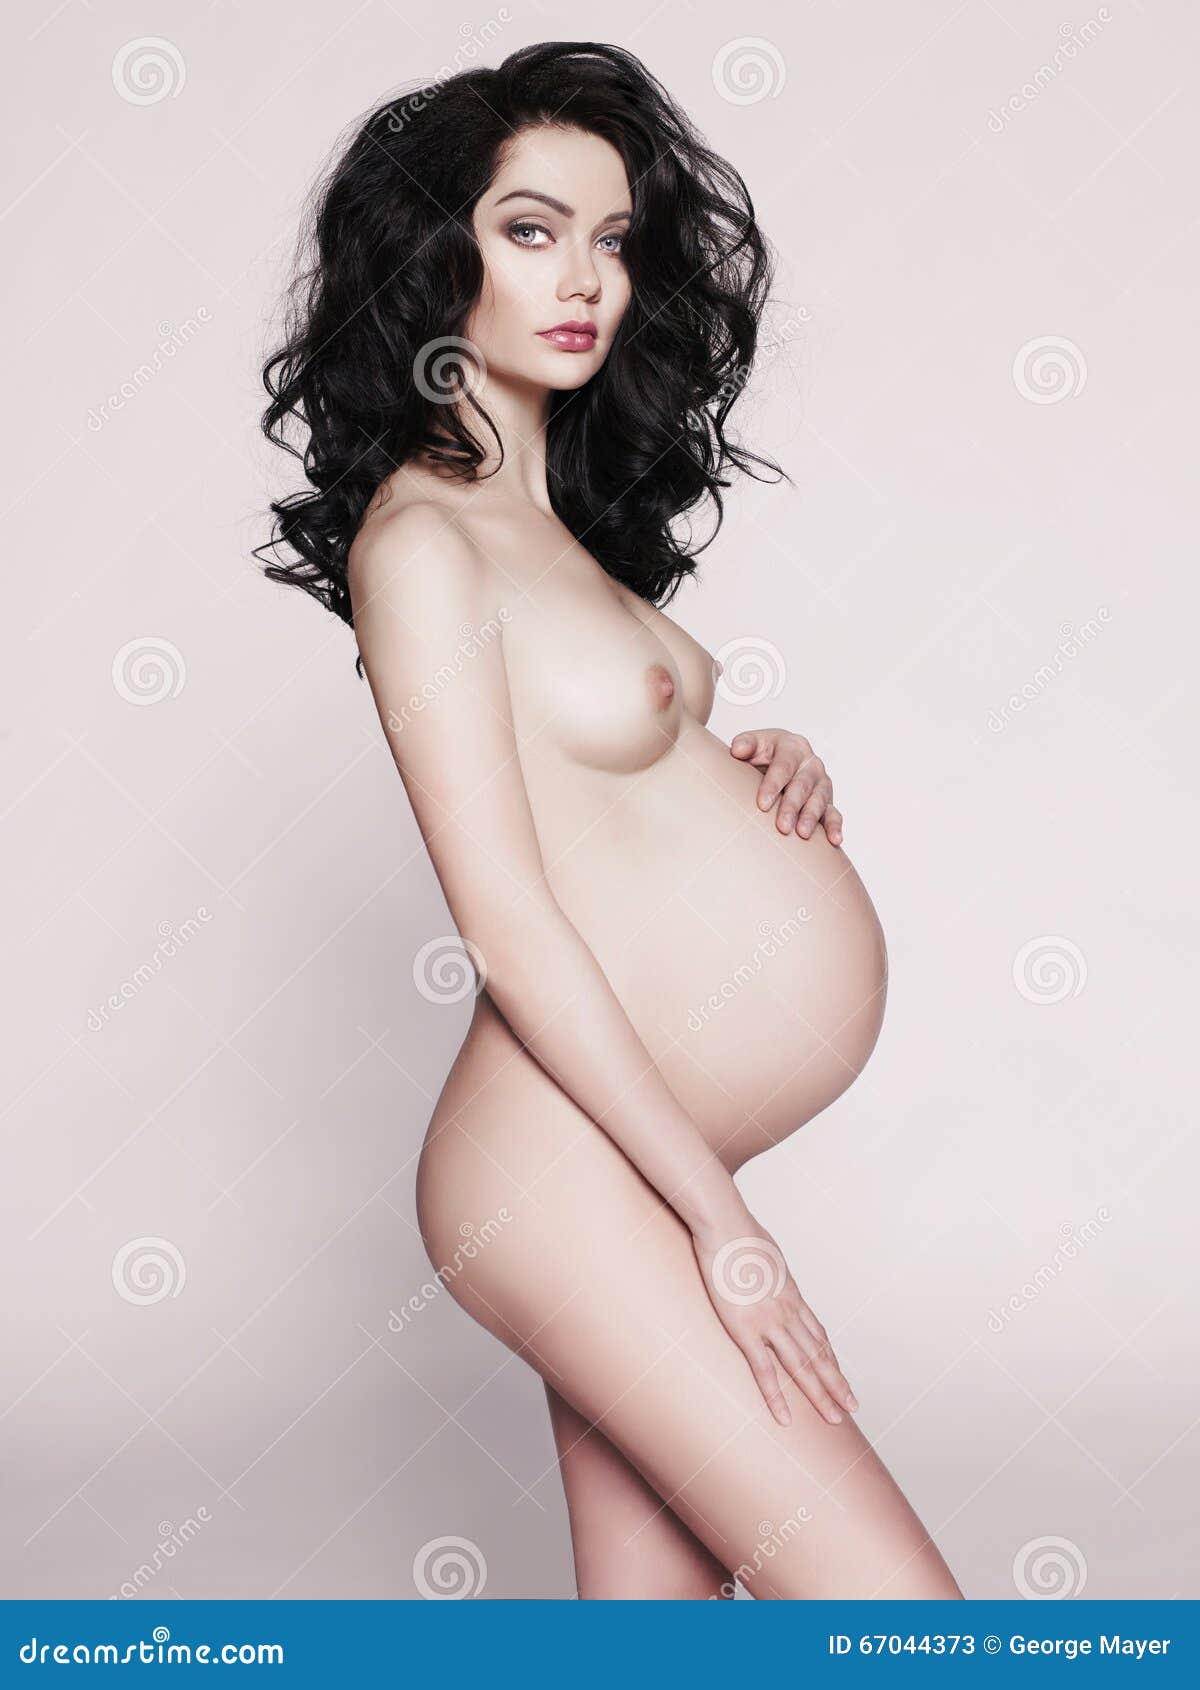 Naked Pregnant Art Photography